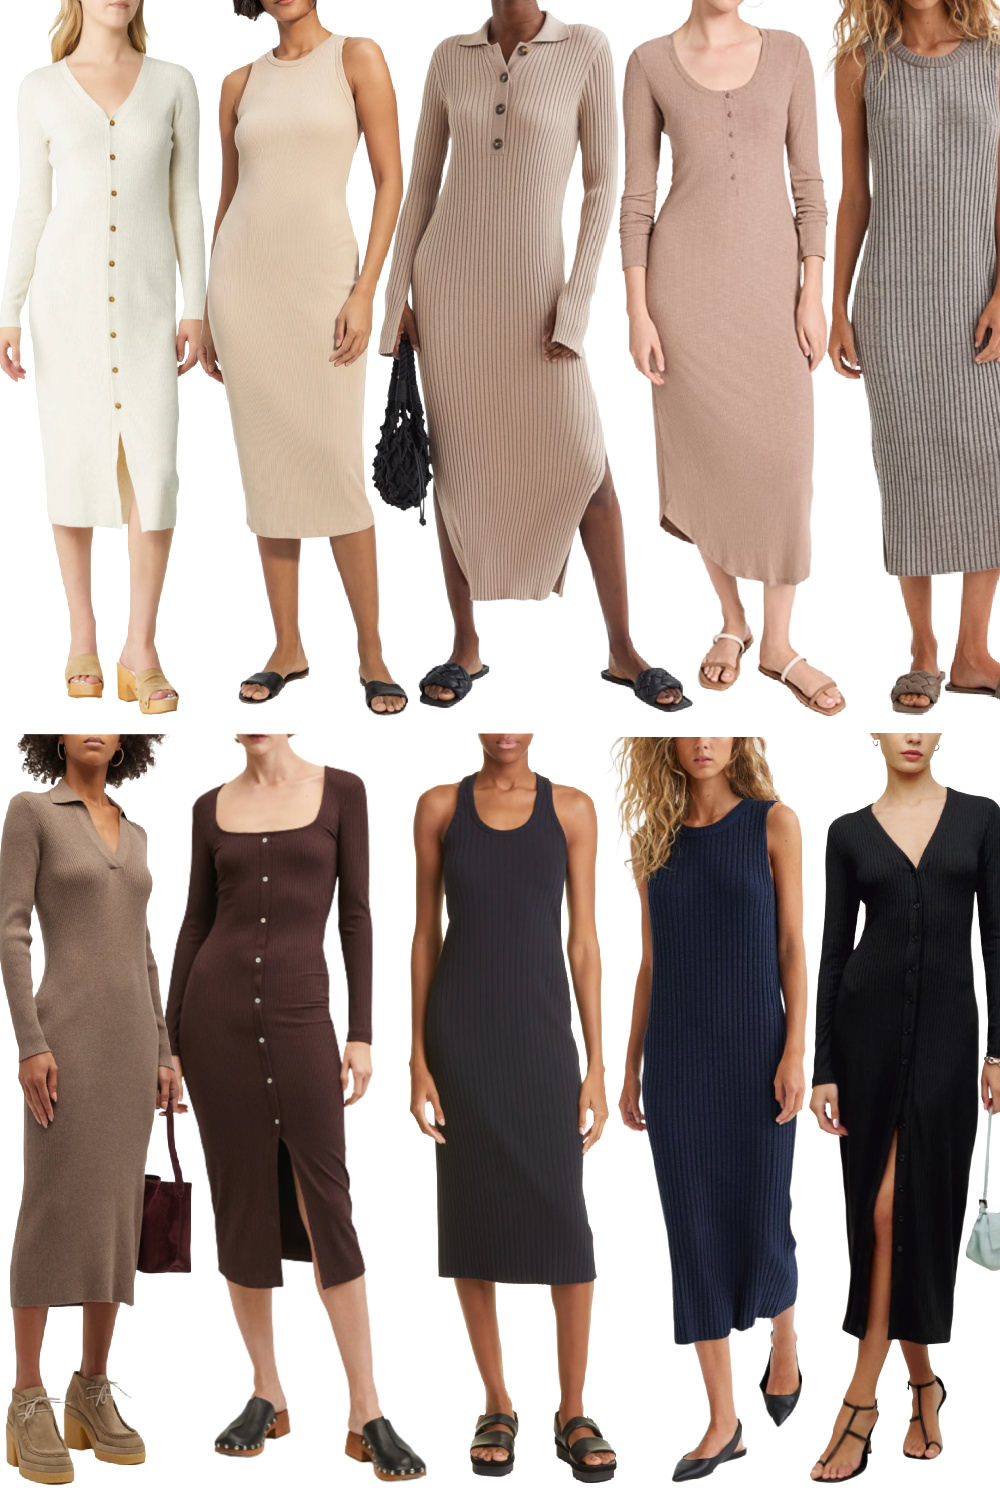 Rib Knit Dresses: The Transitional Style Staple You Need | Natalie 